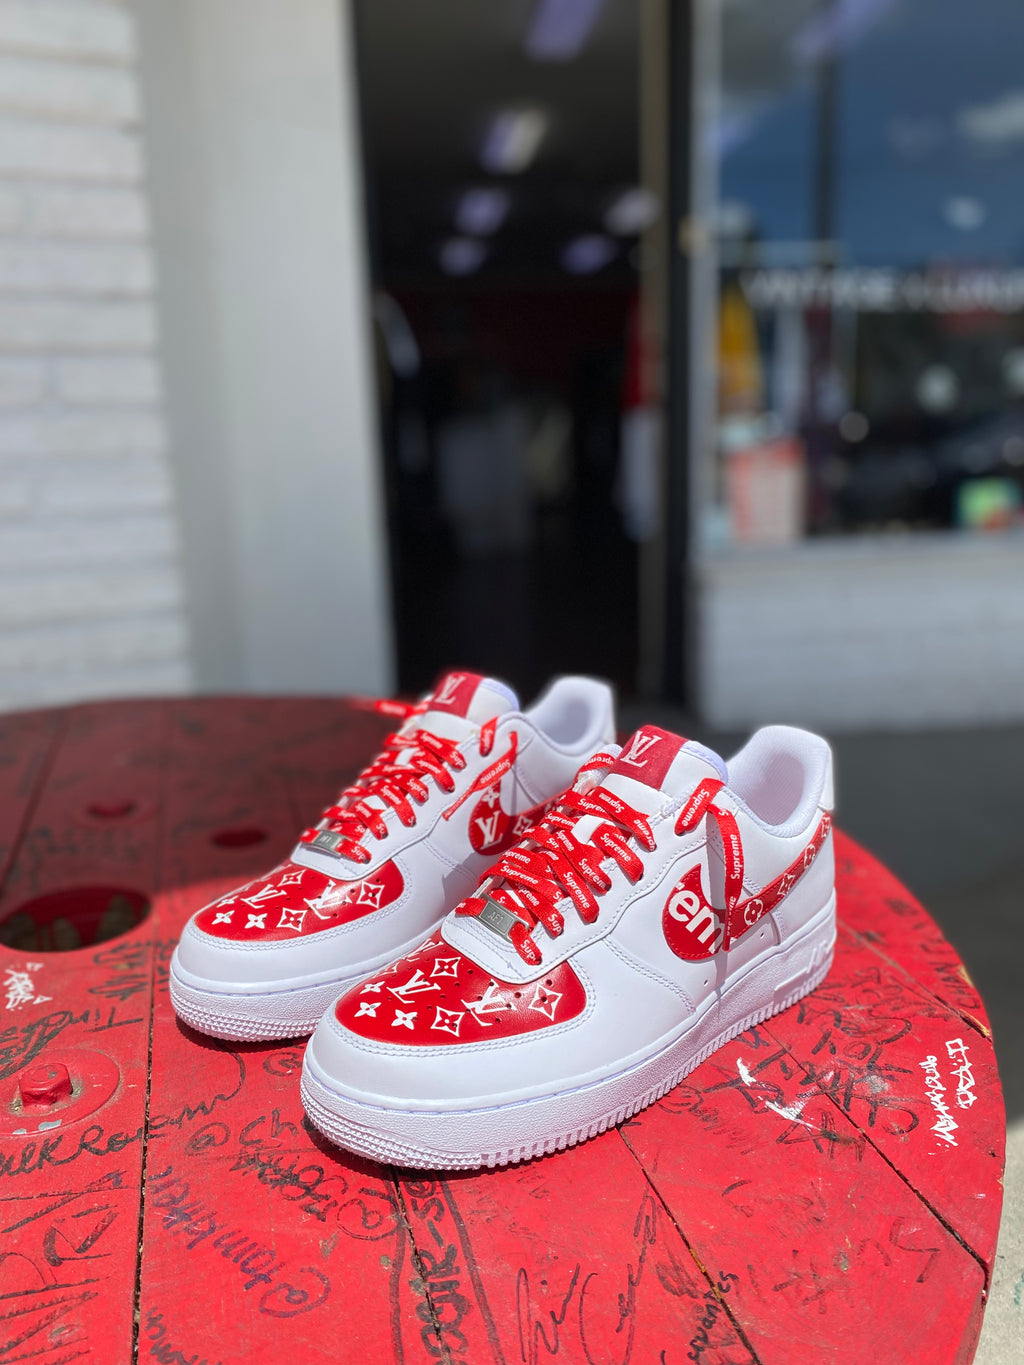 Louis Vuitton x Nike Air Force 1 Red | Size 8.5